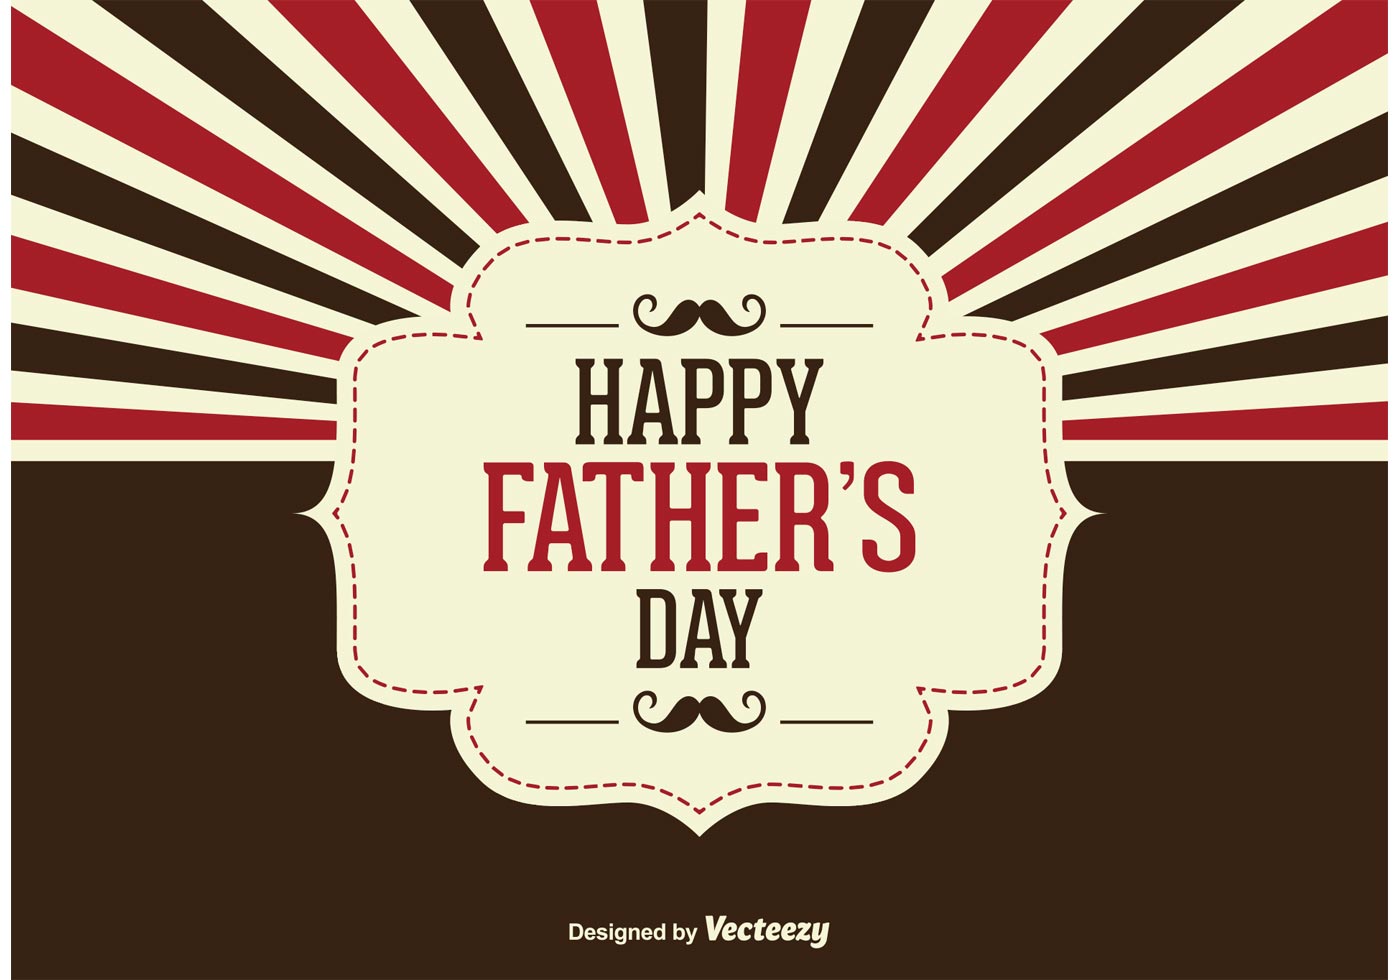 Download Father's Day Vector Illustration - Download Free Vectors, Clipart Graphics & Vector Art